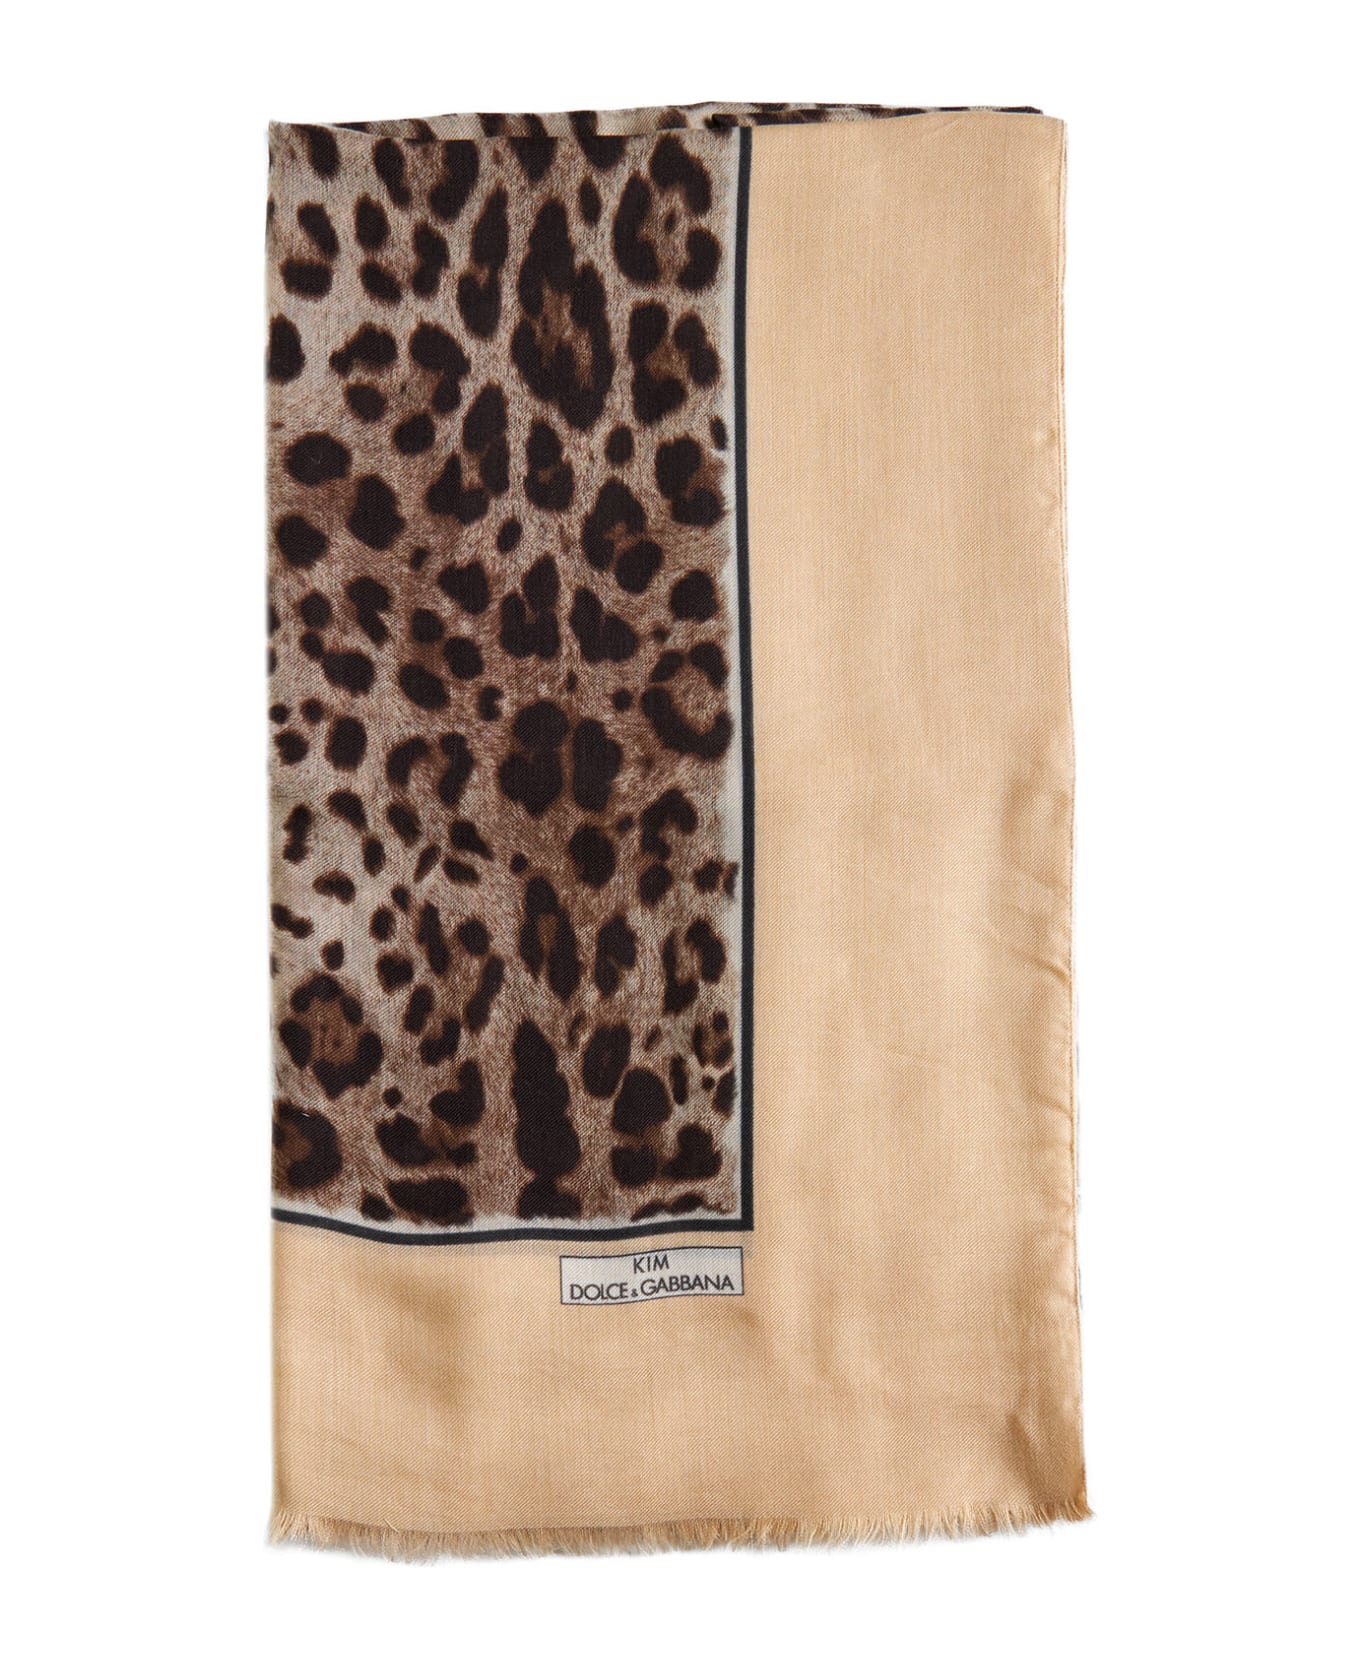 Dolce & Gabbana Modal And Cashmere Blend Scarf - Natural print